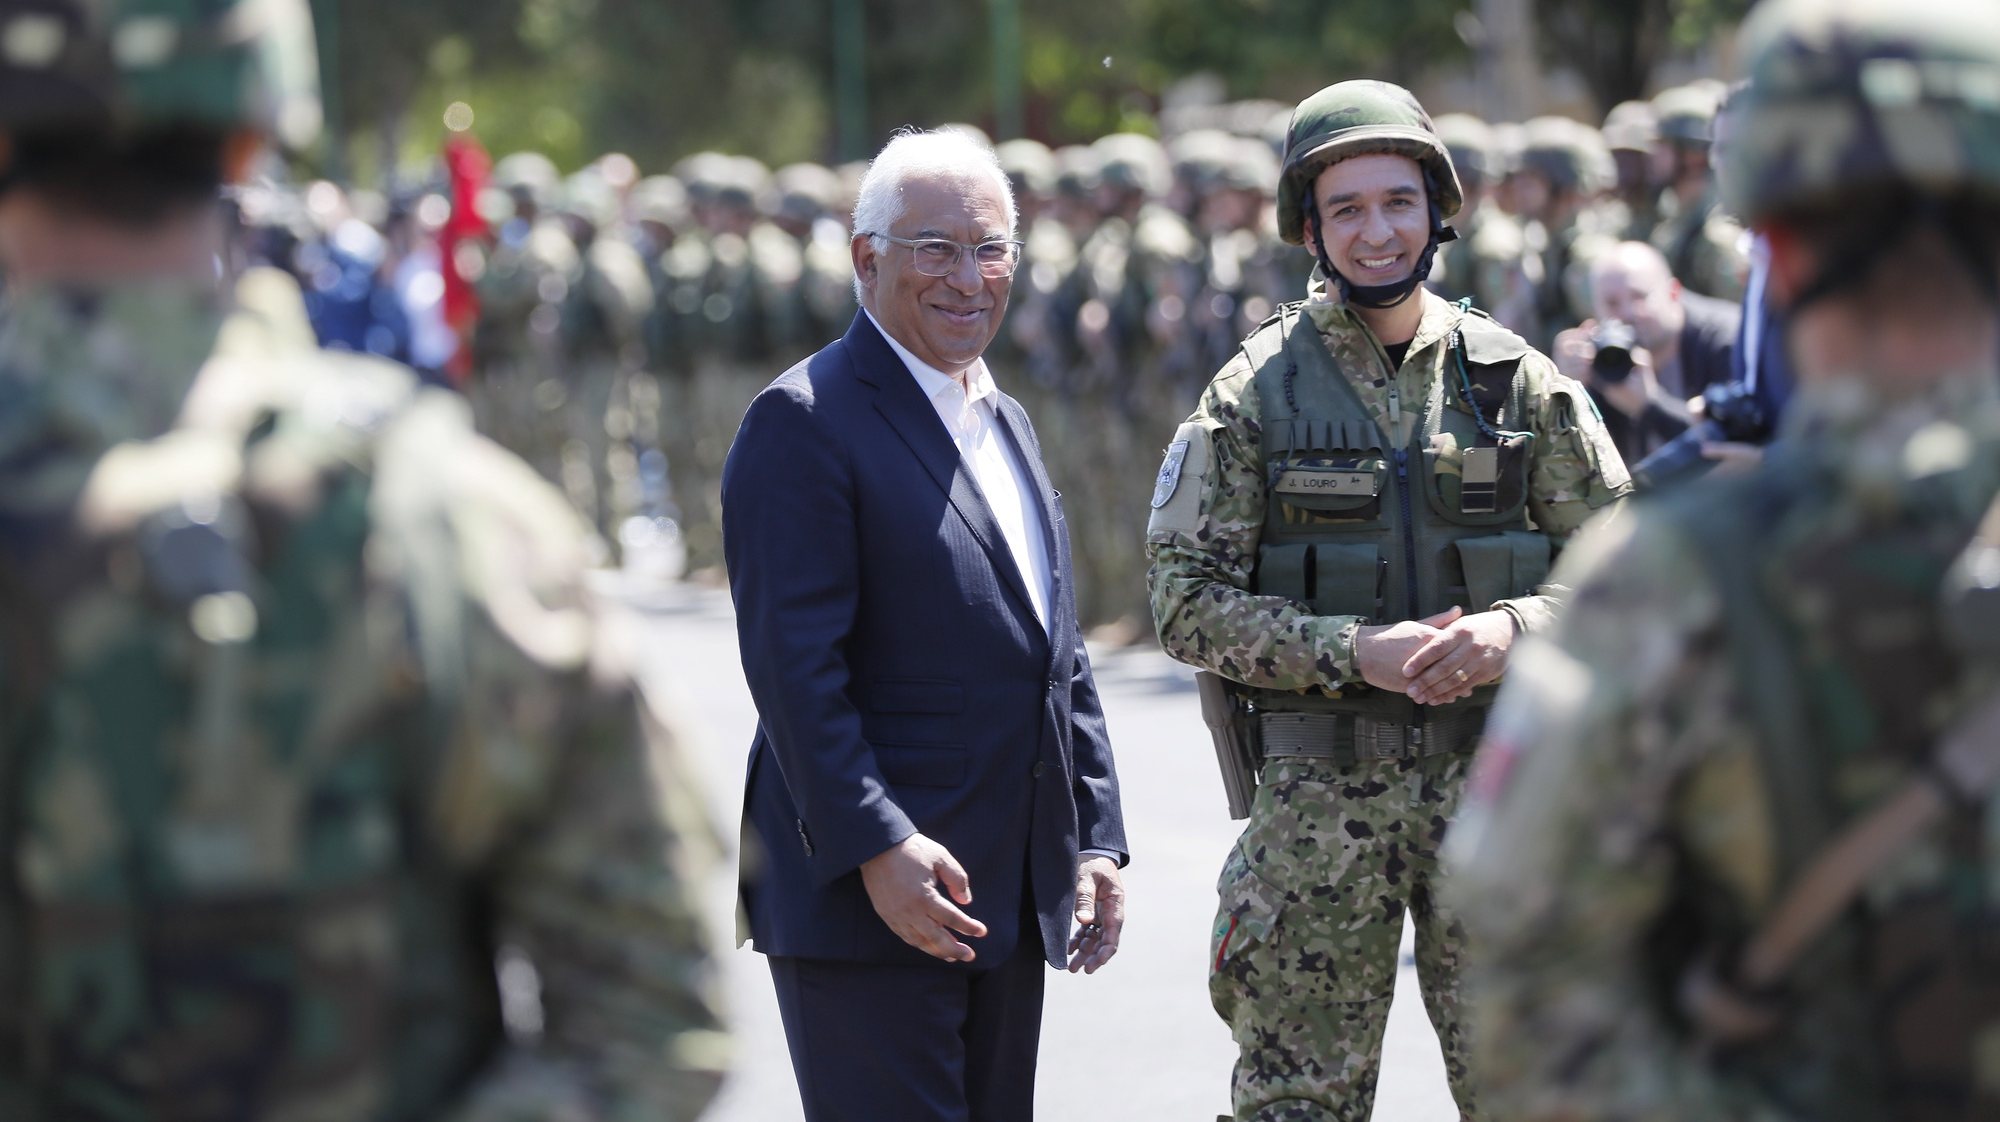 epa09957666 Portuguese Prime Minister Antonio Costa (L) interacts with a Portuguese military unit hosted at the 1st Instruction Battalion &#039;Olt&#039; military base of the Romanian Army, in Caracal city, 200 Km west from Bucharest, Romania, 19 May 2022. Romanian President Klaus Iohannis and Portuguese Prime Minister Antonio Costa met Romanian and Portuguese military personnel from the NATO alliance deployed to Romania amid rising tensions at the Black-Sea region due to the Russian-Ukrainian conflict.  EPA/ROBERT GHEMENT